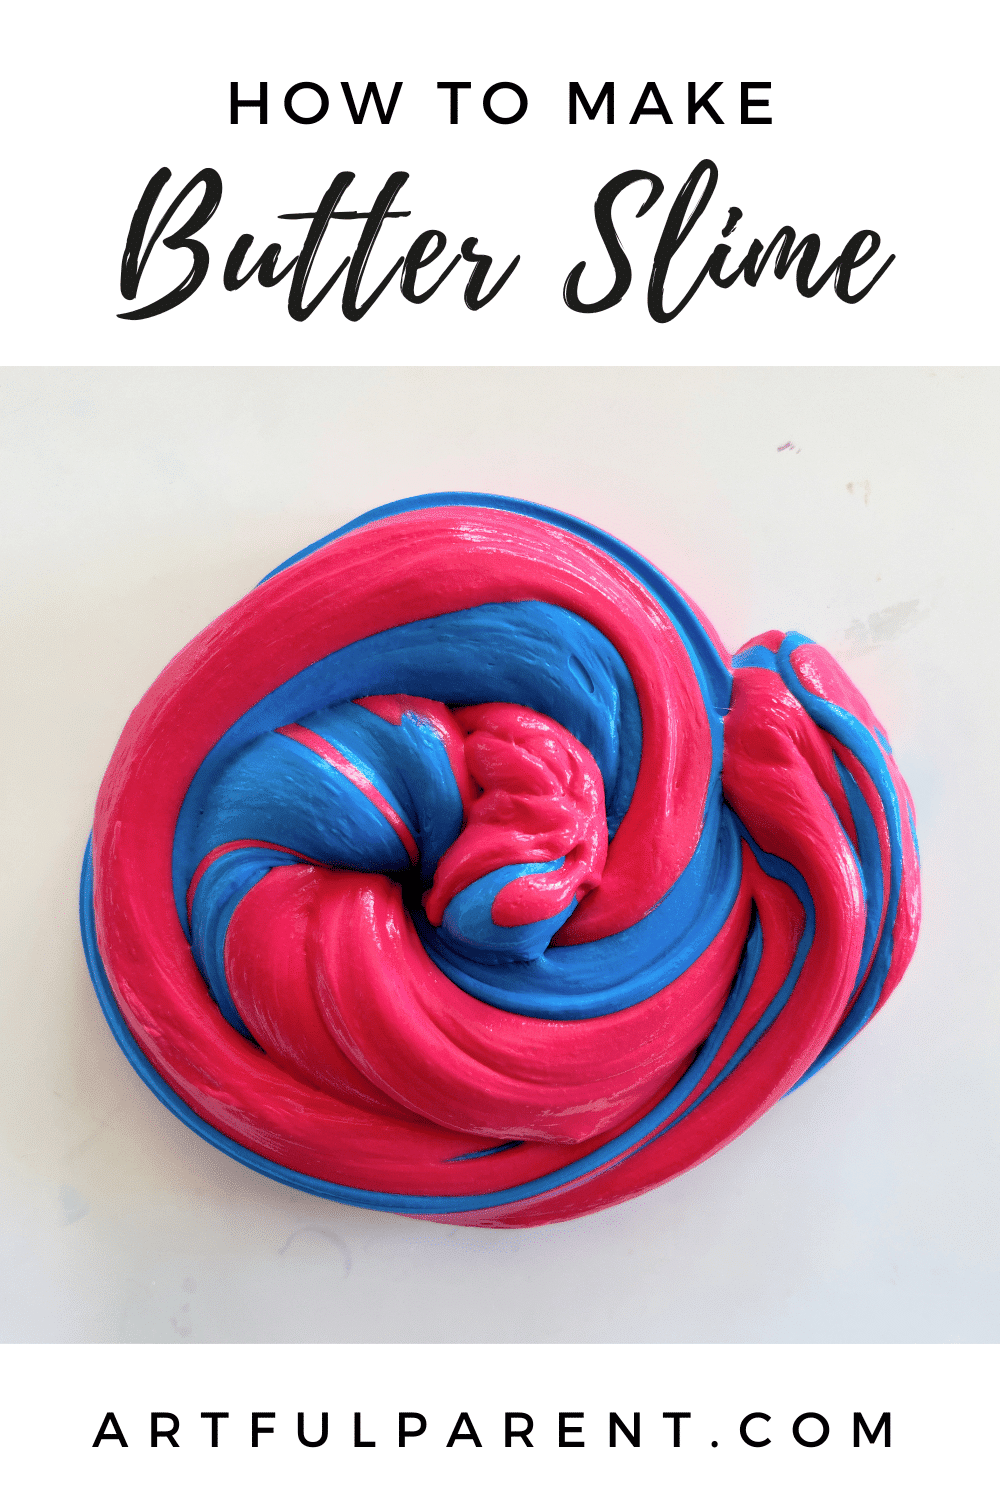 How to Make Butter Slime without Borax